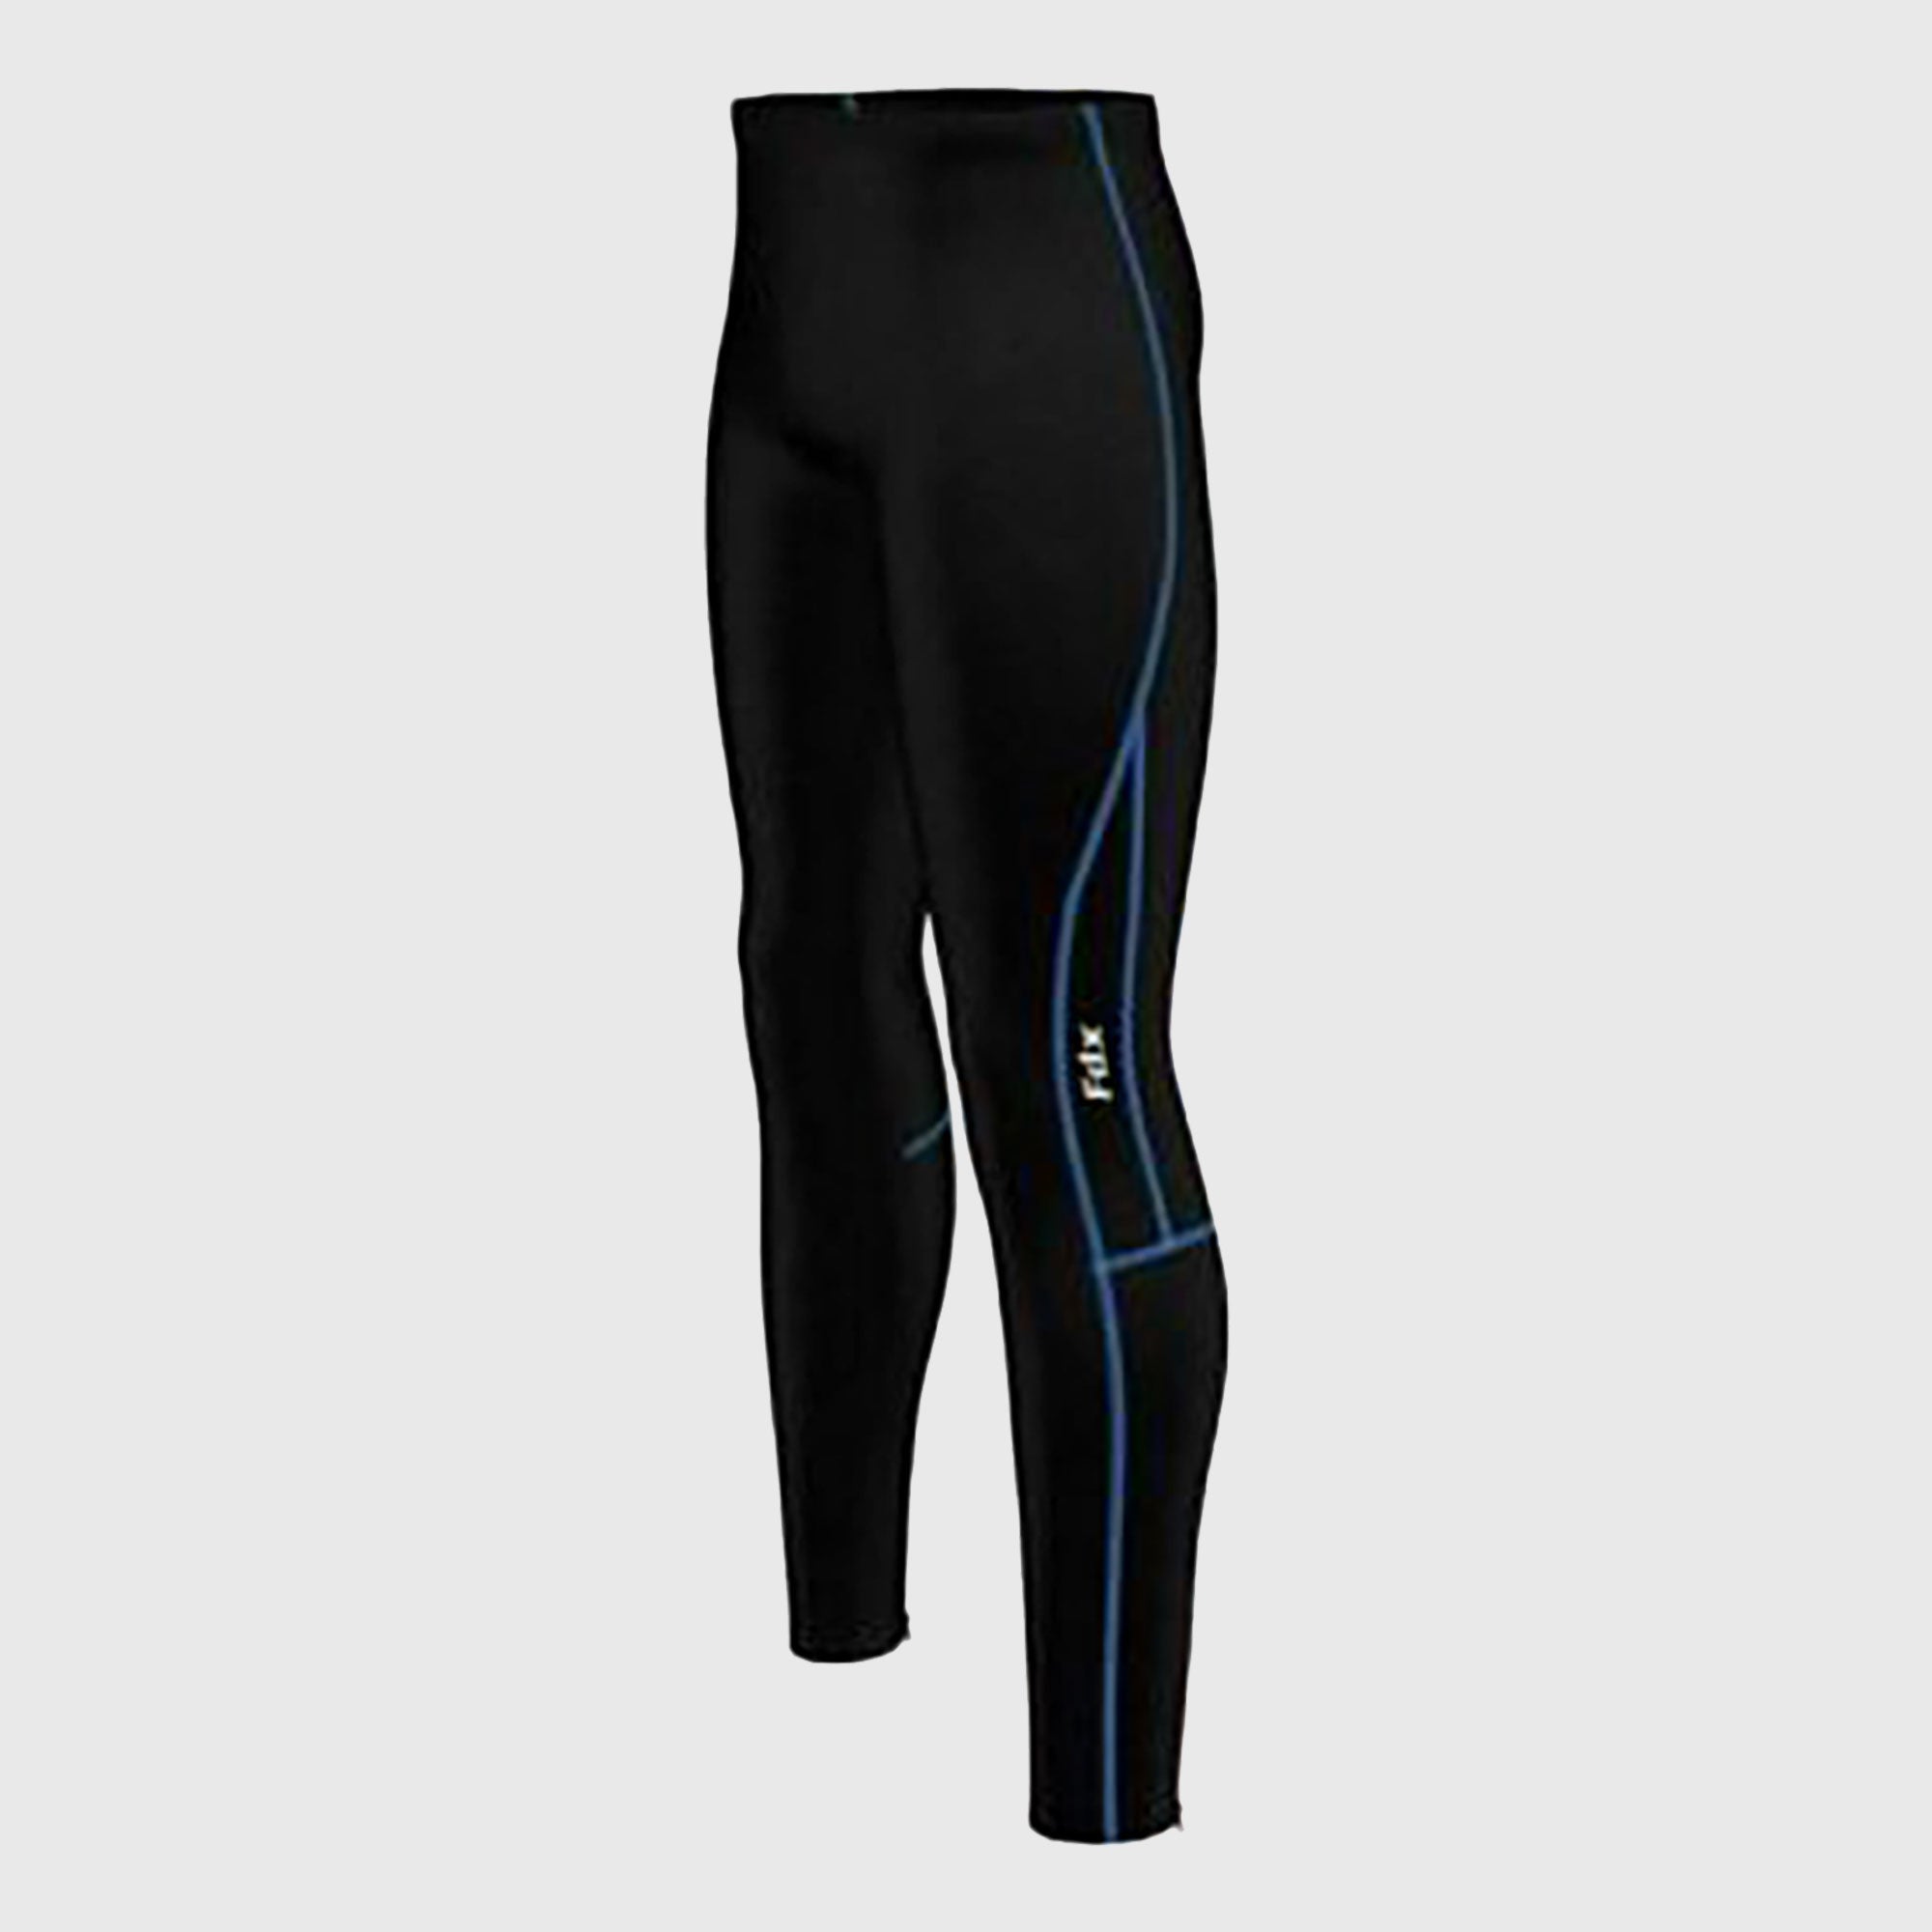 Related: Blue Men 1 Cycling Tights